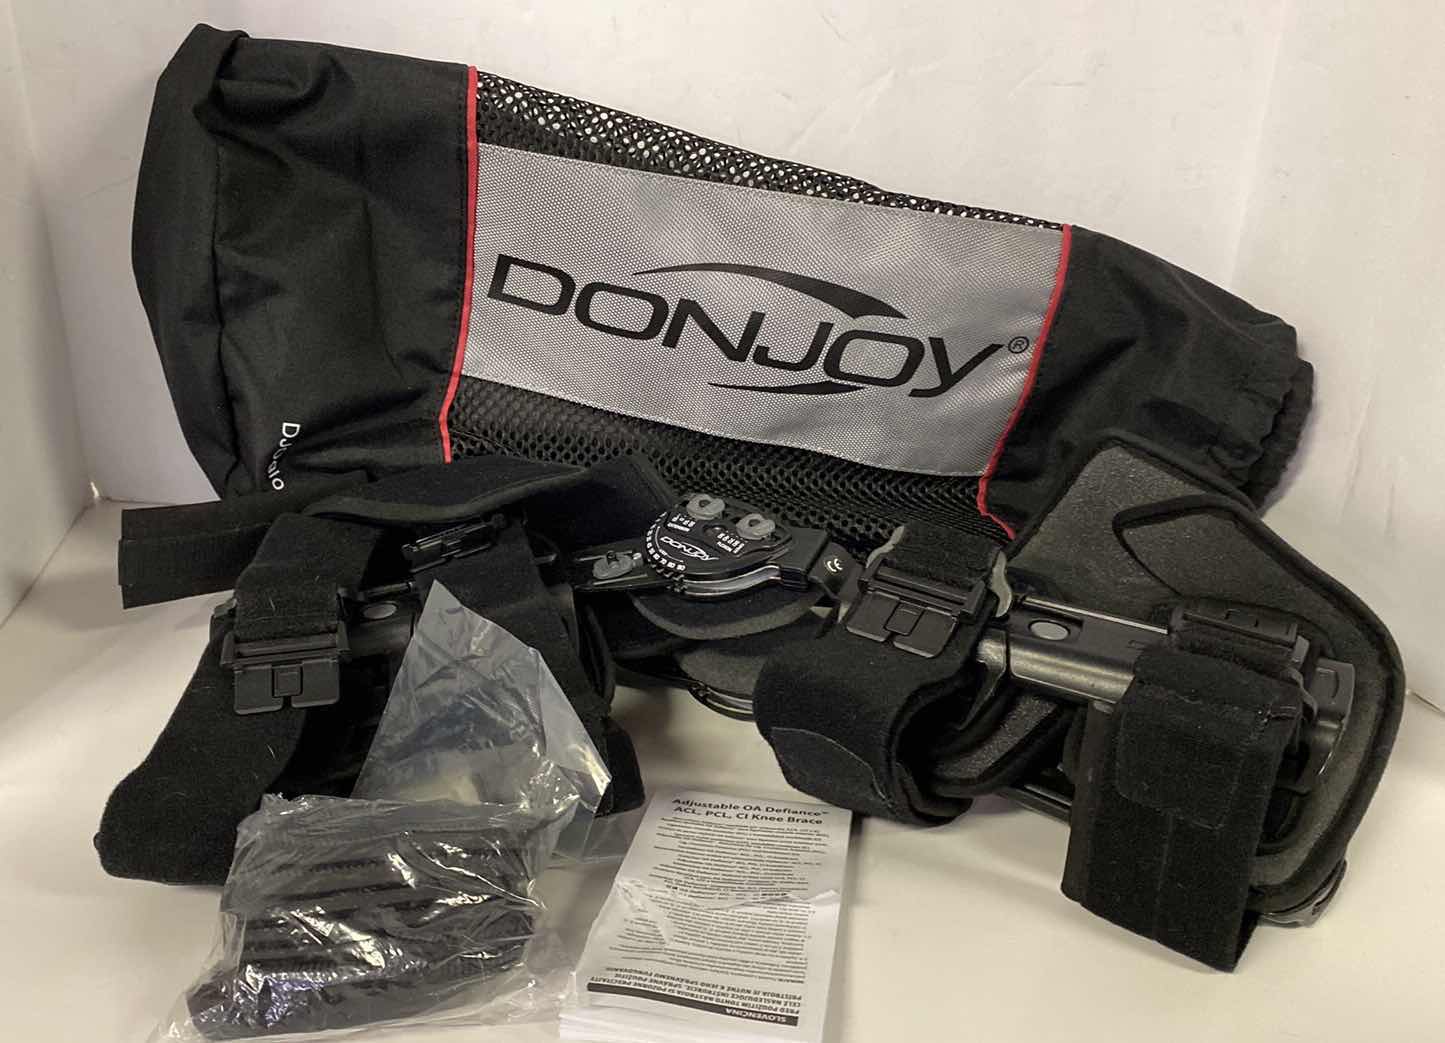 Photo 1 of DONJOY ADJUSTABLE KNEE BRACE WITH ACCESSORIES AND CARRY BAG